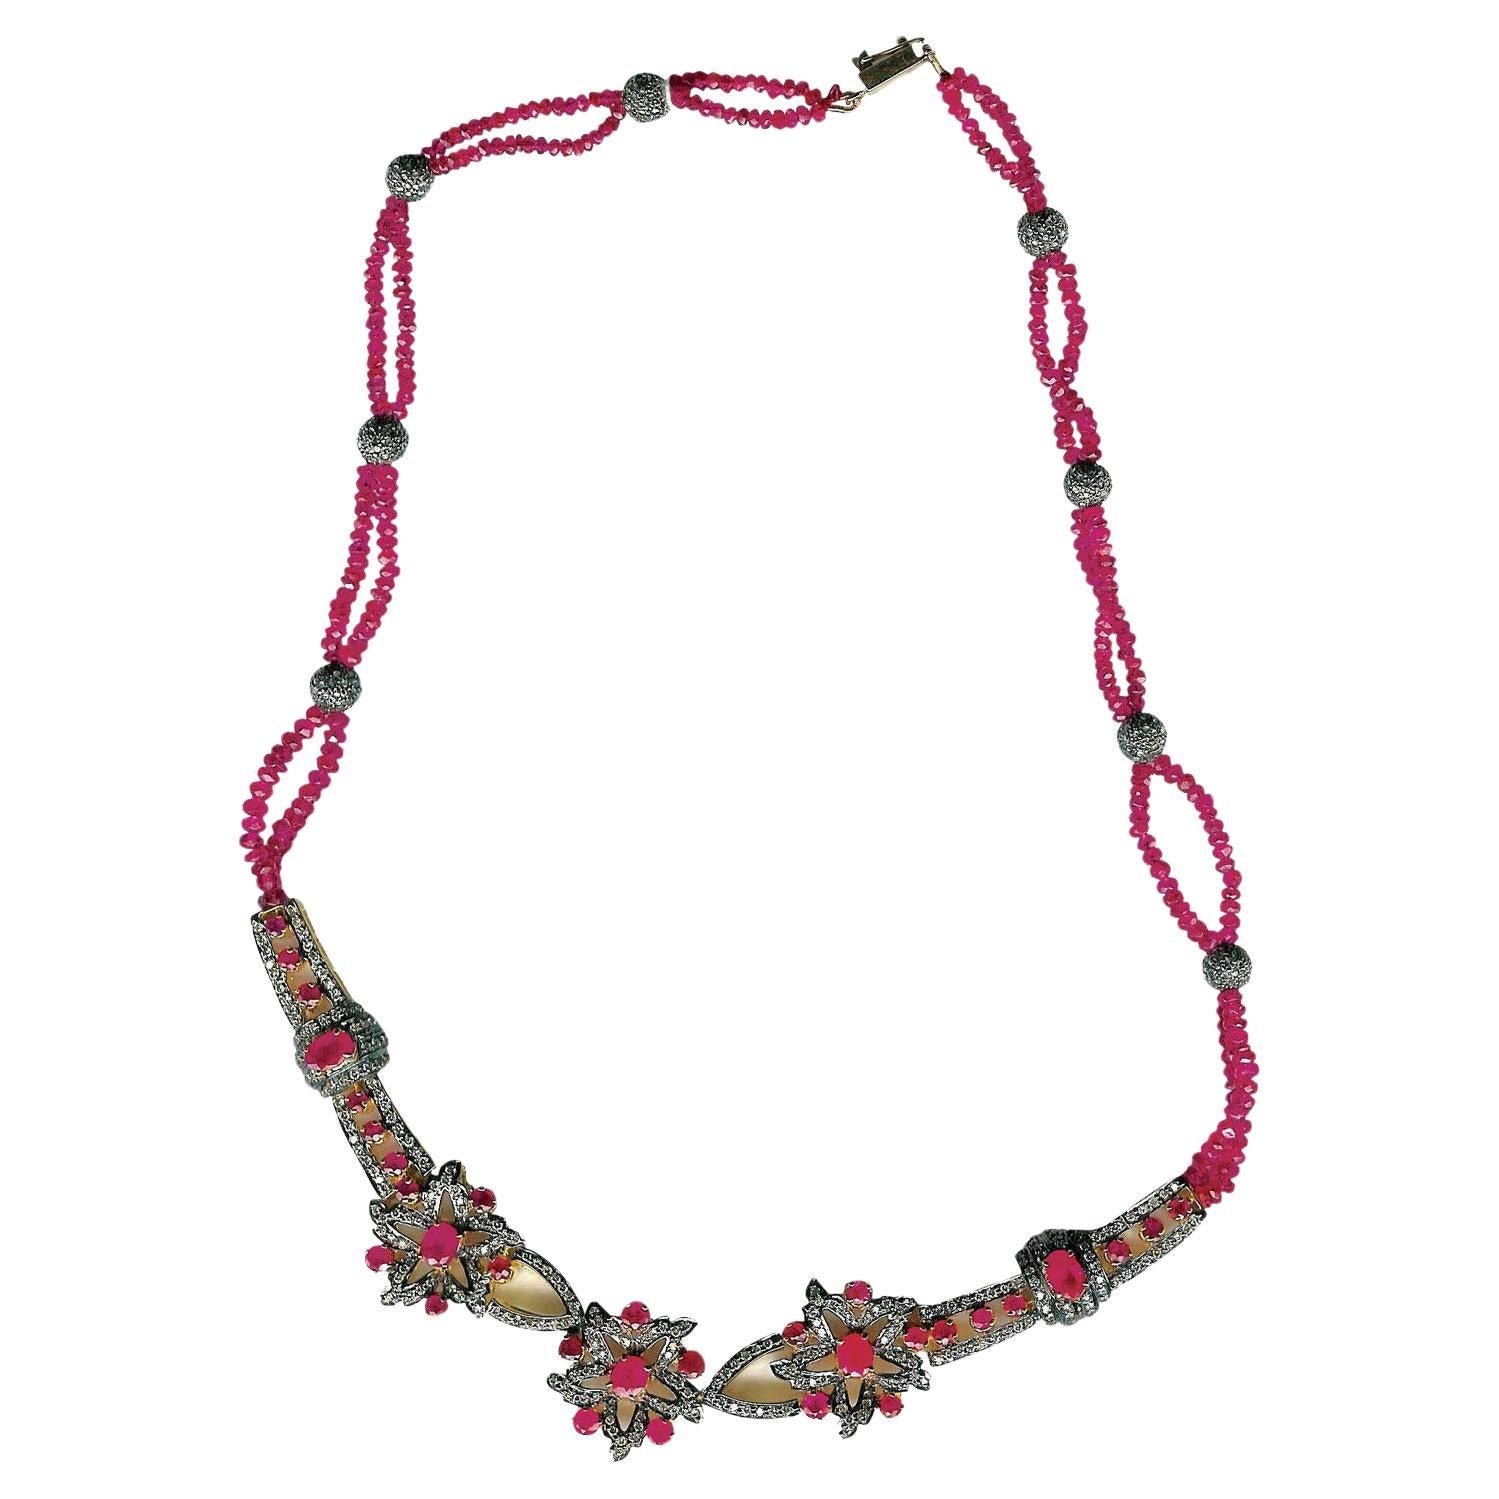 Ethnic Looking Ruby Beaded Necklace With Diamonds Made In 18k Yellow Gold